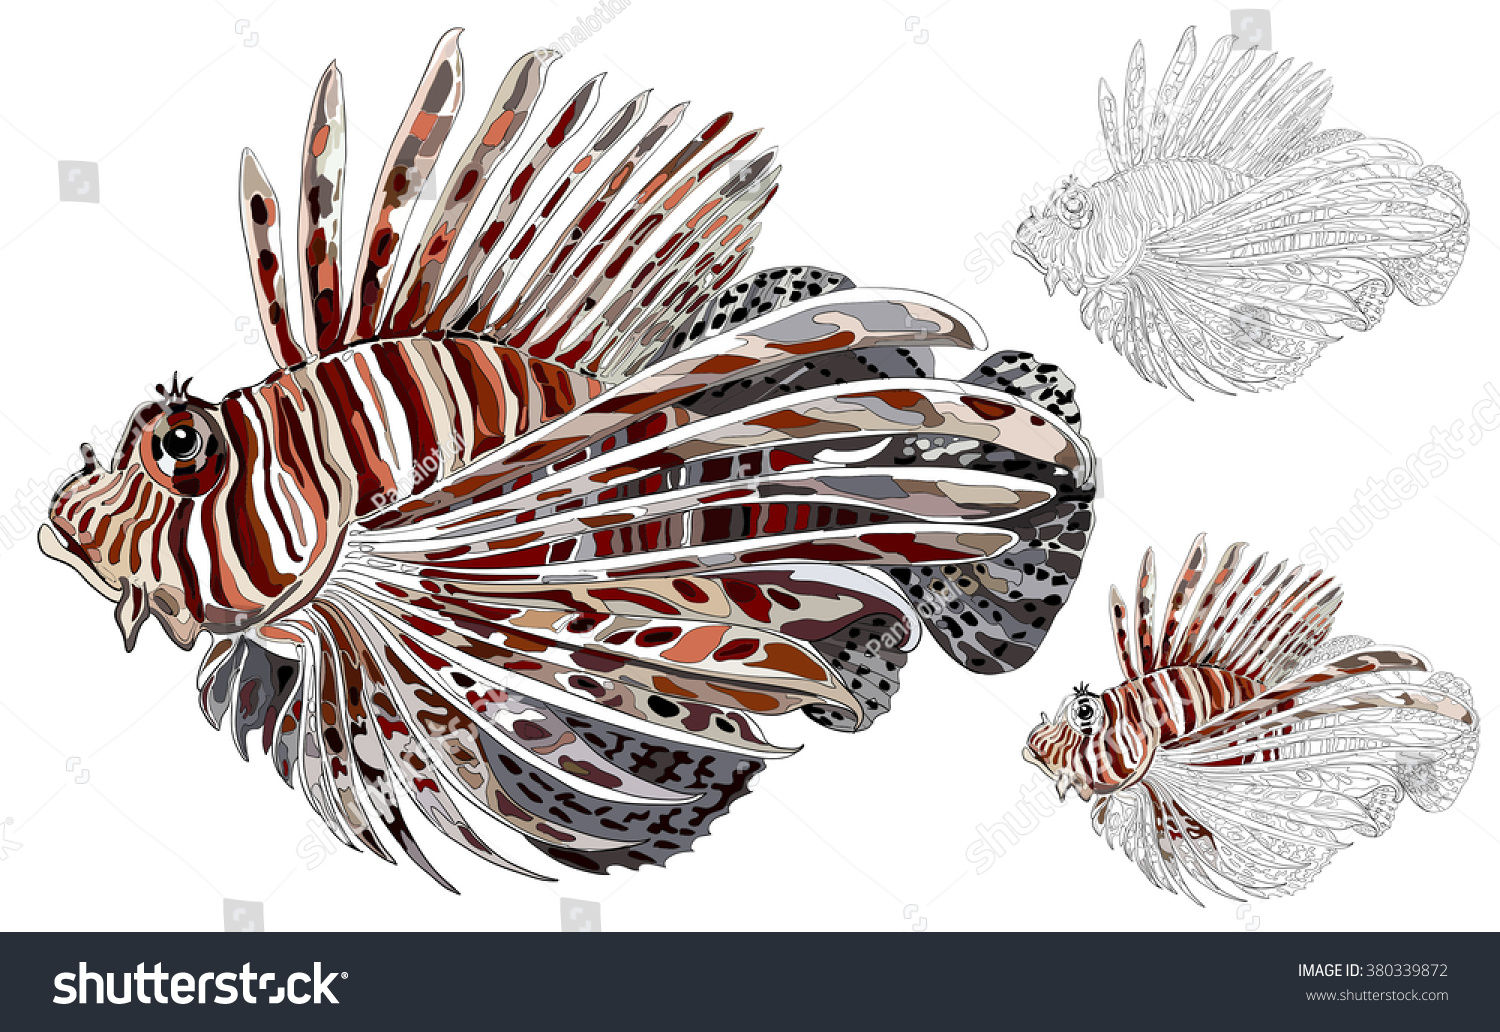 Download Red Lionfish Pterois Volitans Vector Image Stock Vector 380339872 - Shutterstock